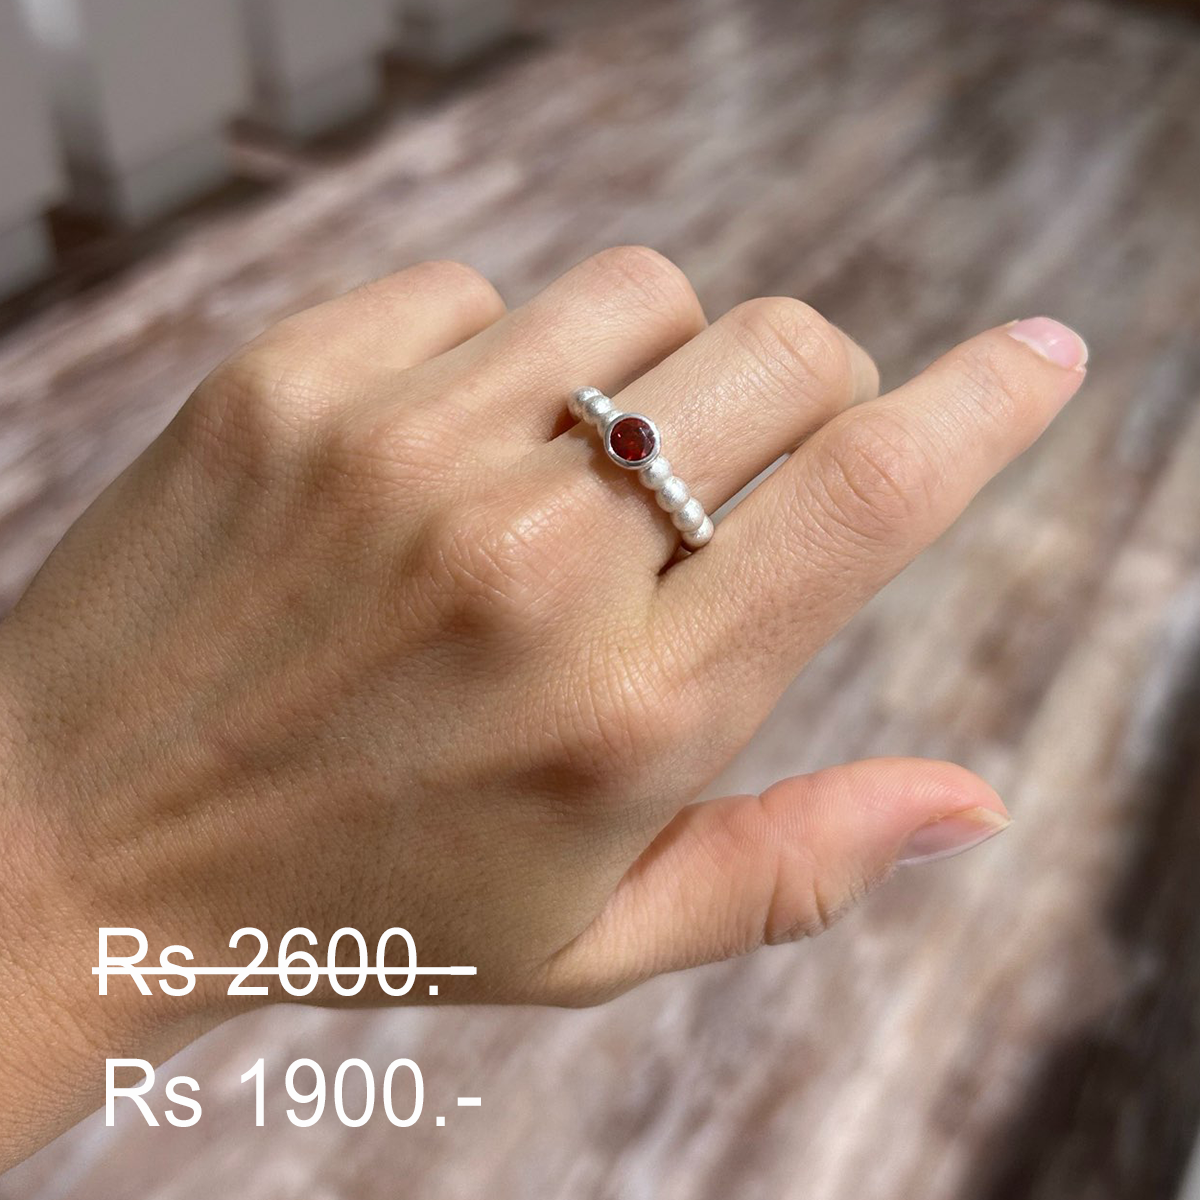 Discounted red zirconia ring